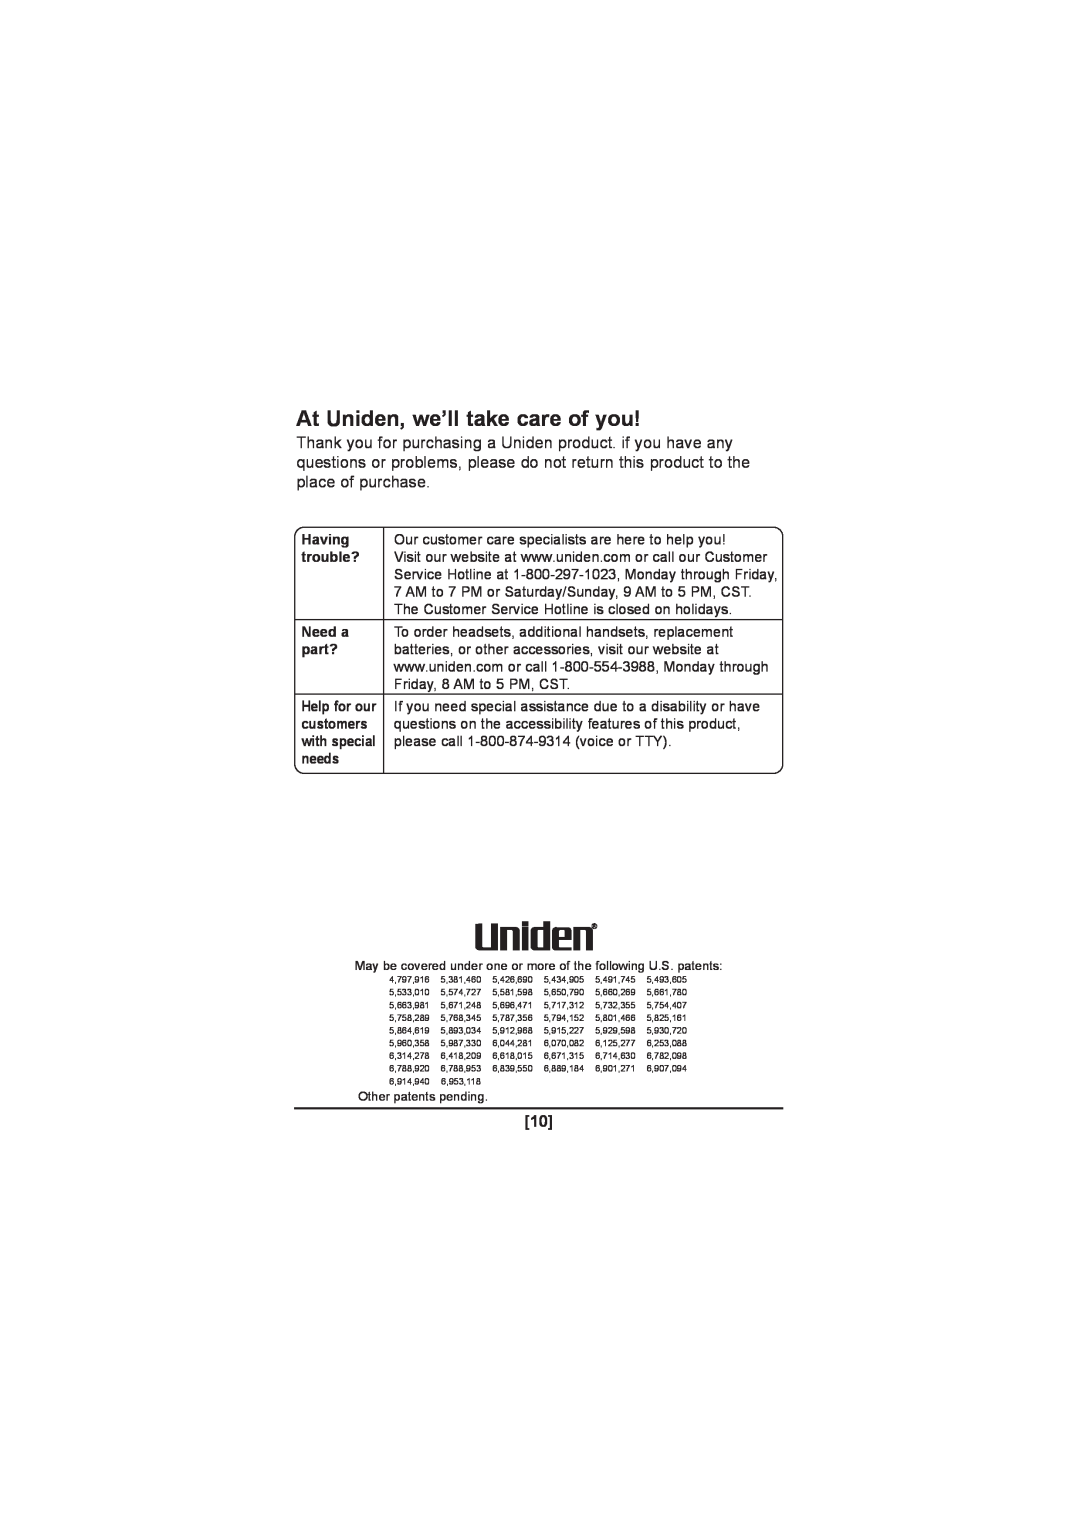 Uniden DCX100 manual At Uniden, we’ll take care of you, Having, trouble?, Need a, part?, customers, needs 